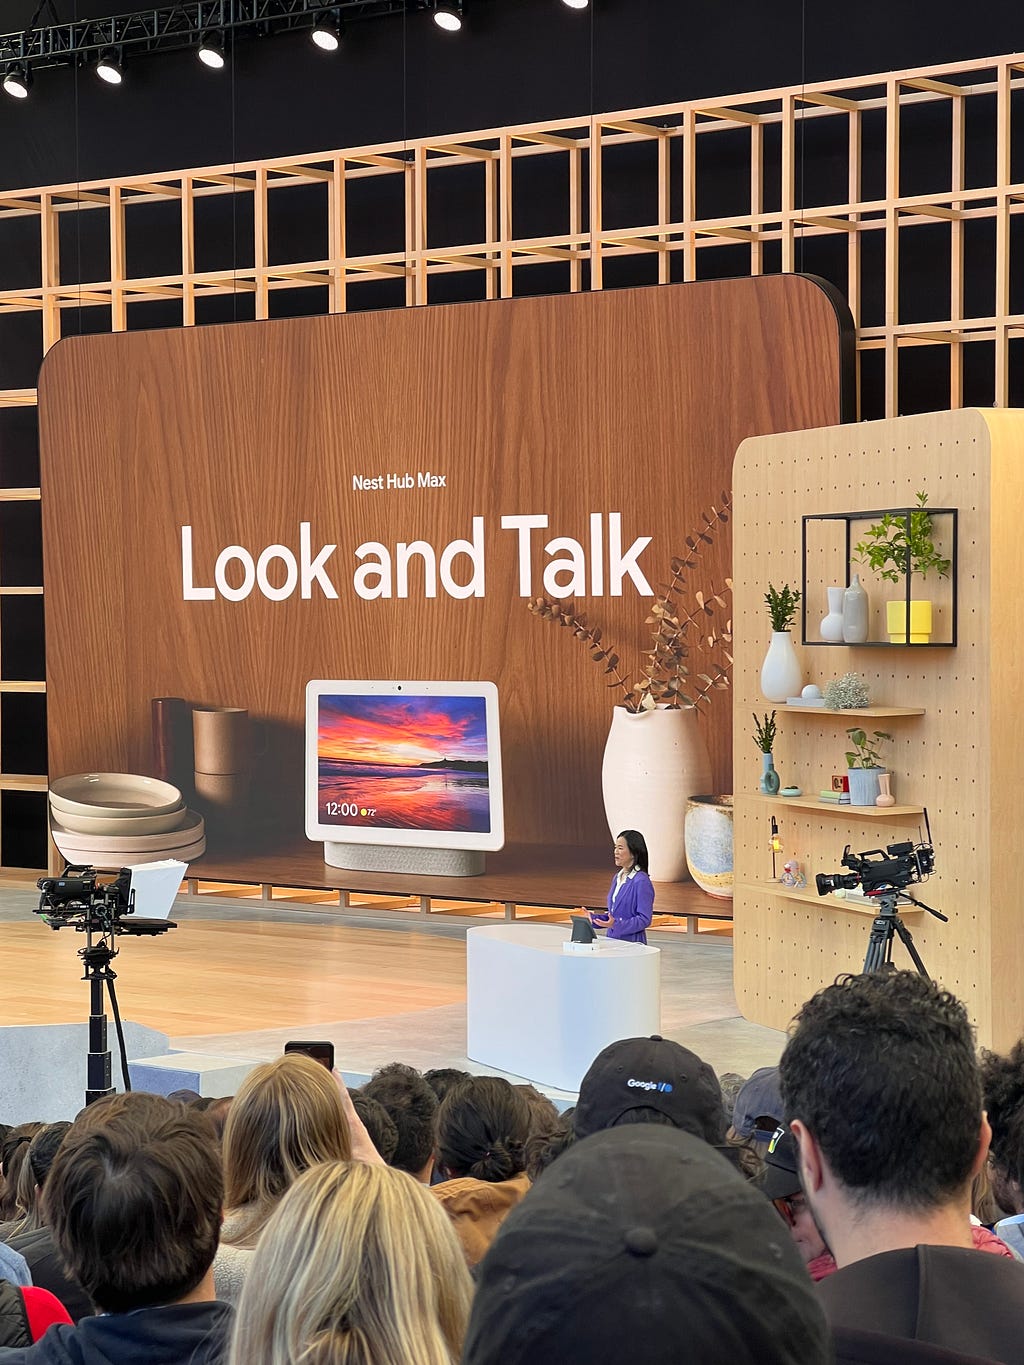 Cici showcasing Google Assistant’s new features. Backdrop has the words “Look and Talk”